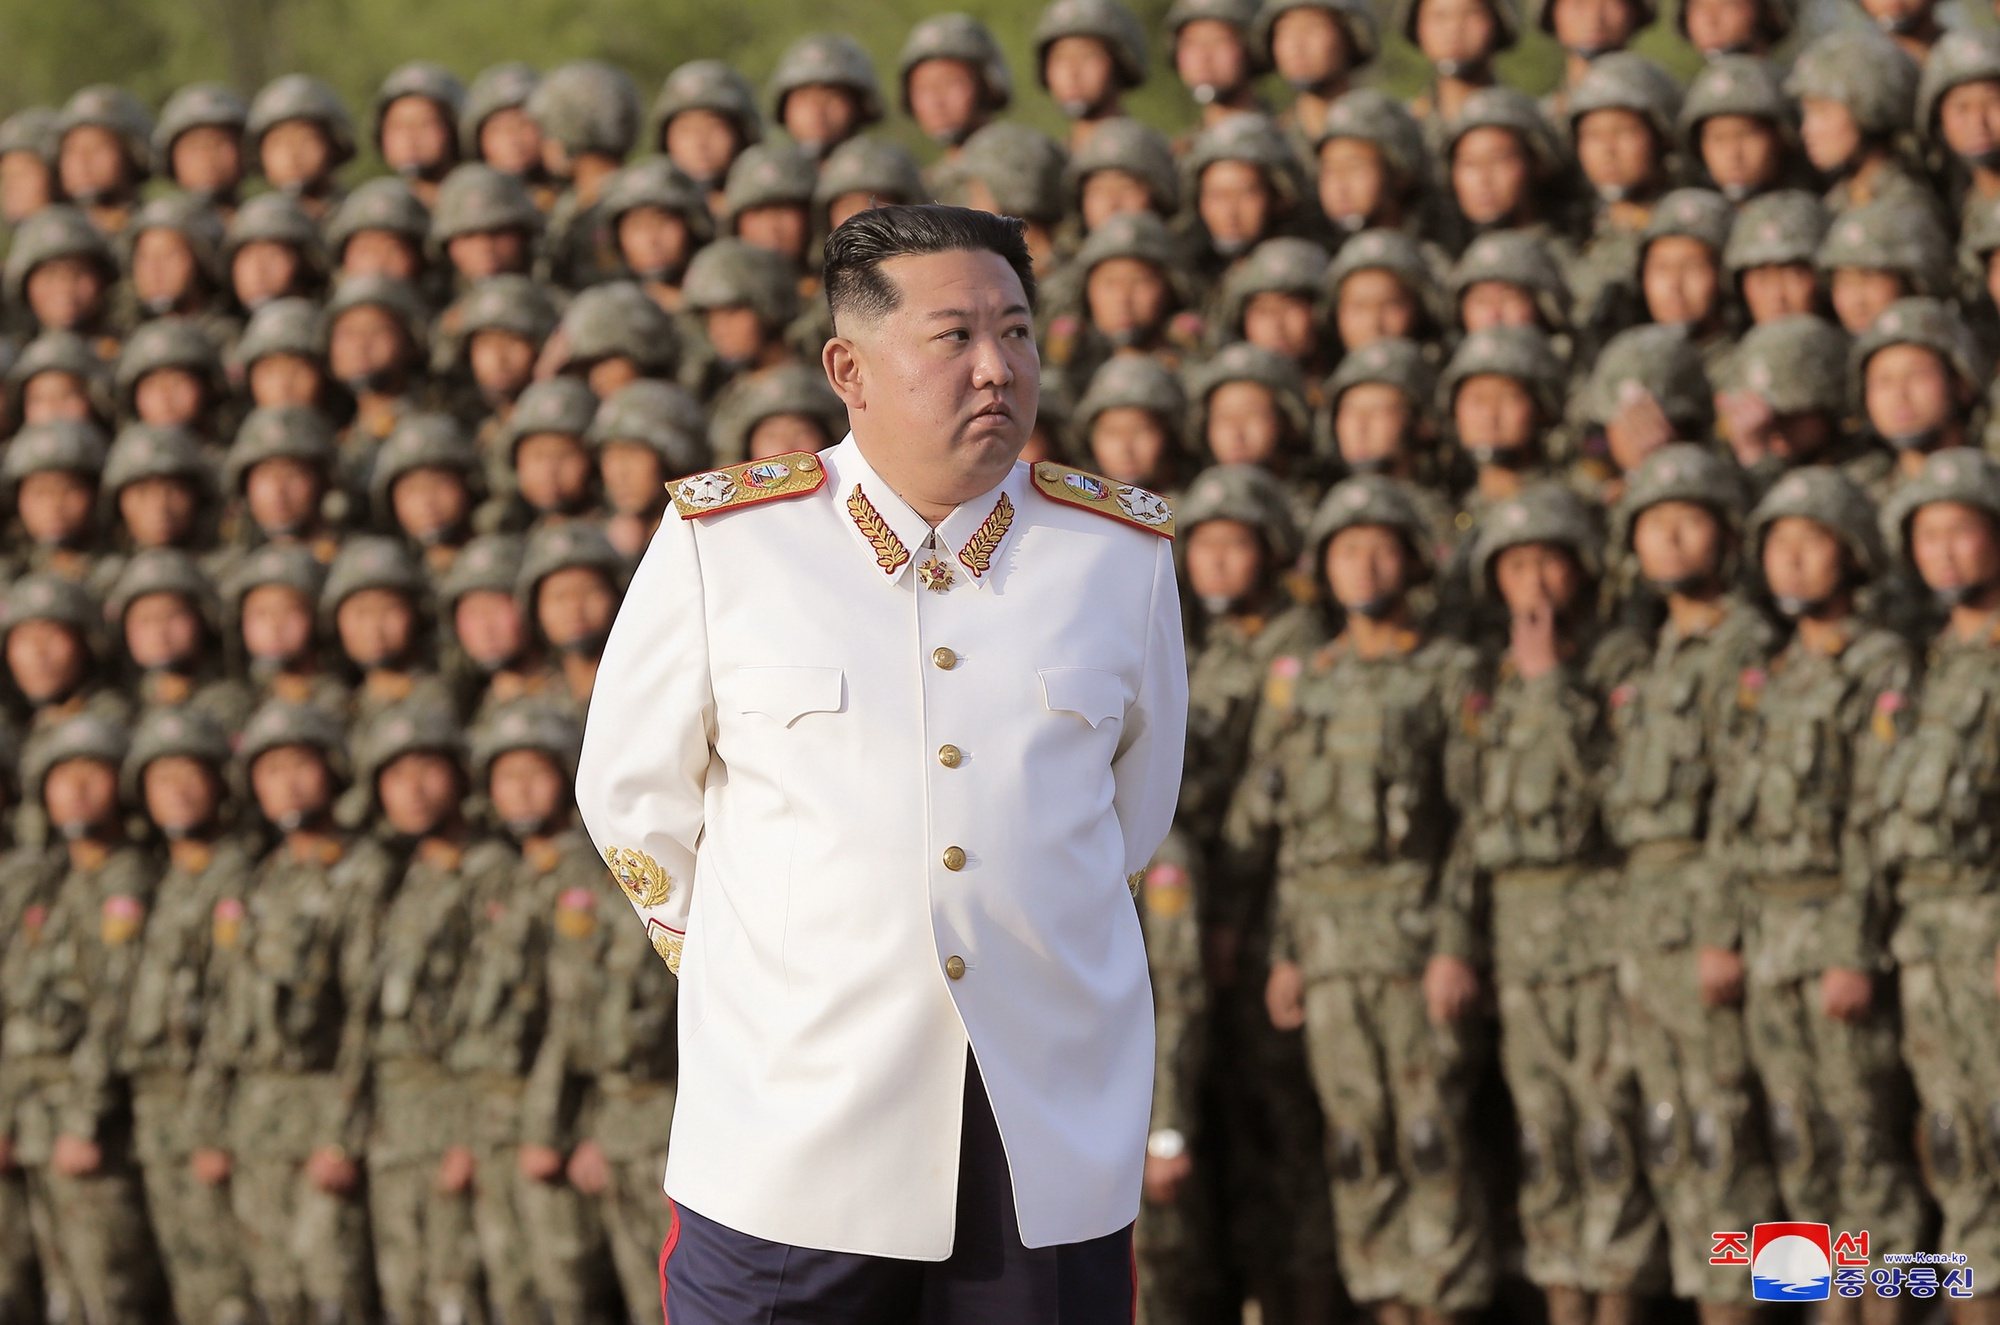 epa09915666 A photo released by the official North Korean Central News Agency (KCNA) shows North Korean Supreme Leader Kim Jong-Un wearing a white marshal uniform, during a photo session with the officers and soldiers that took part in a military parade, in Pyongyang, North Korea, 27 April 2022 (issued 29 April 2022). The soldiers participated in a military parade in Pyongyang on April 25 to mark the 90th anniversary of the Korean People&#039;s Revolutionary Army.  EPA/KCNA   EDITORIAL USE ONLY